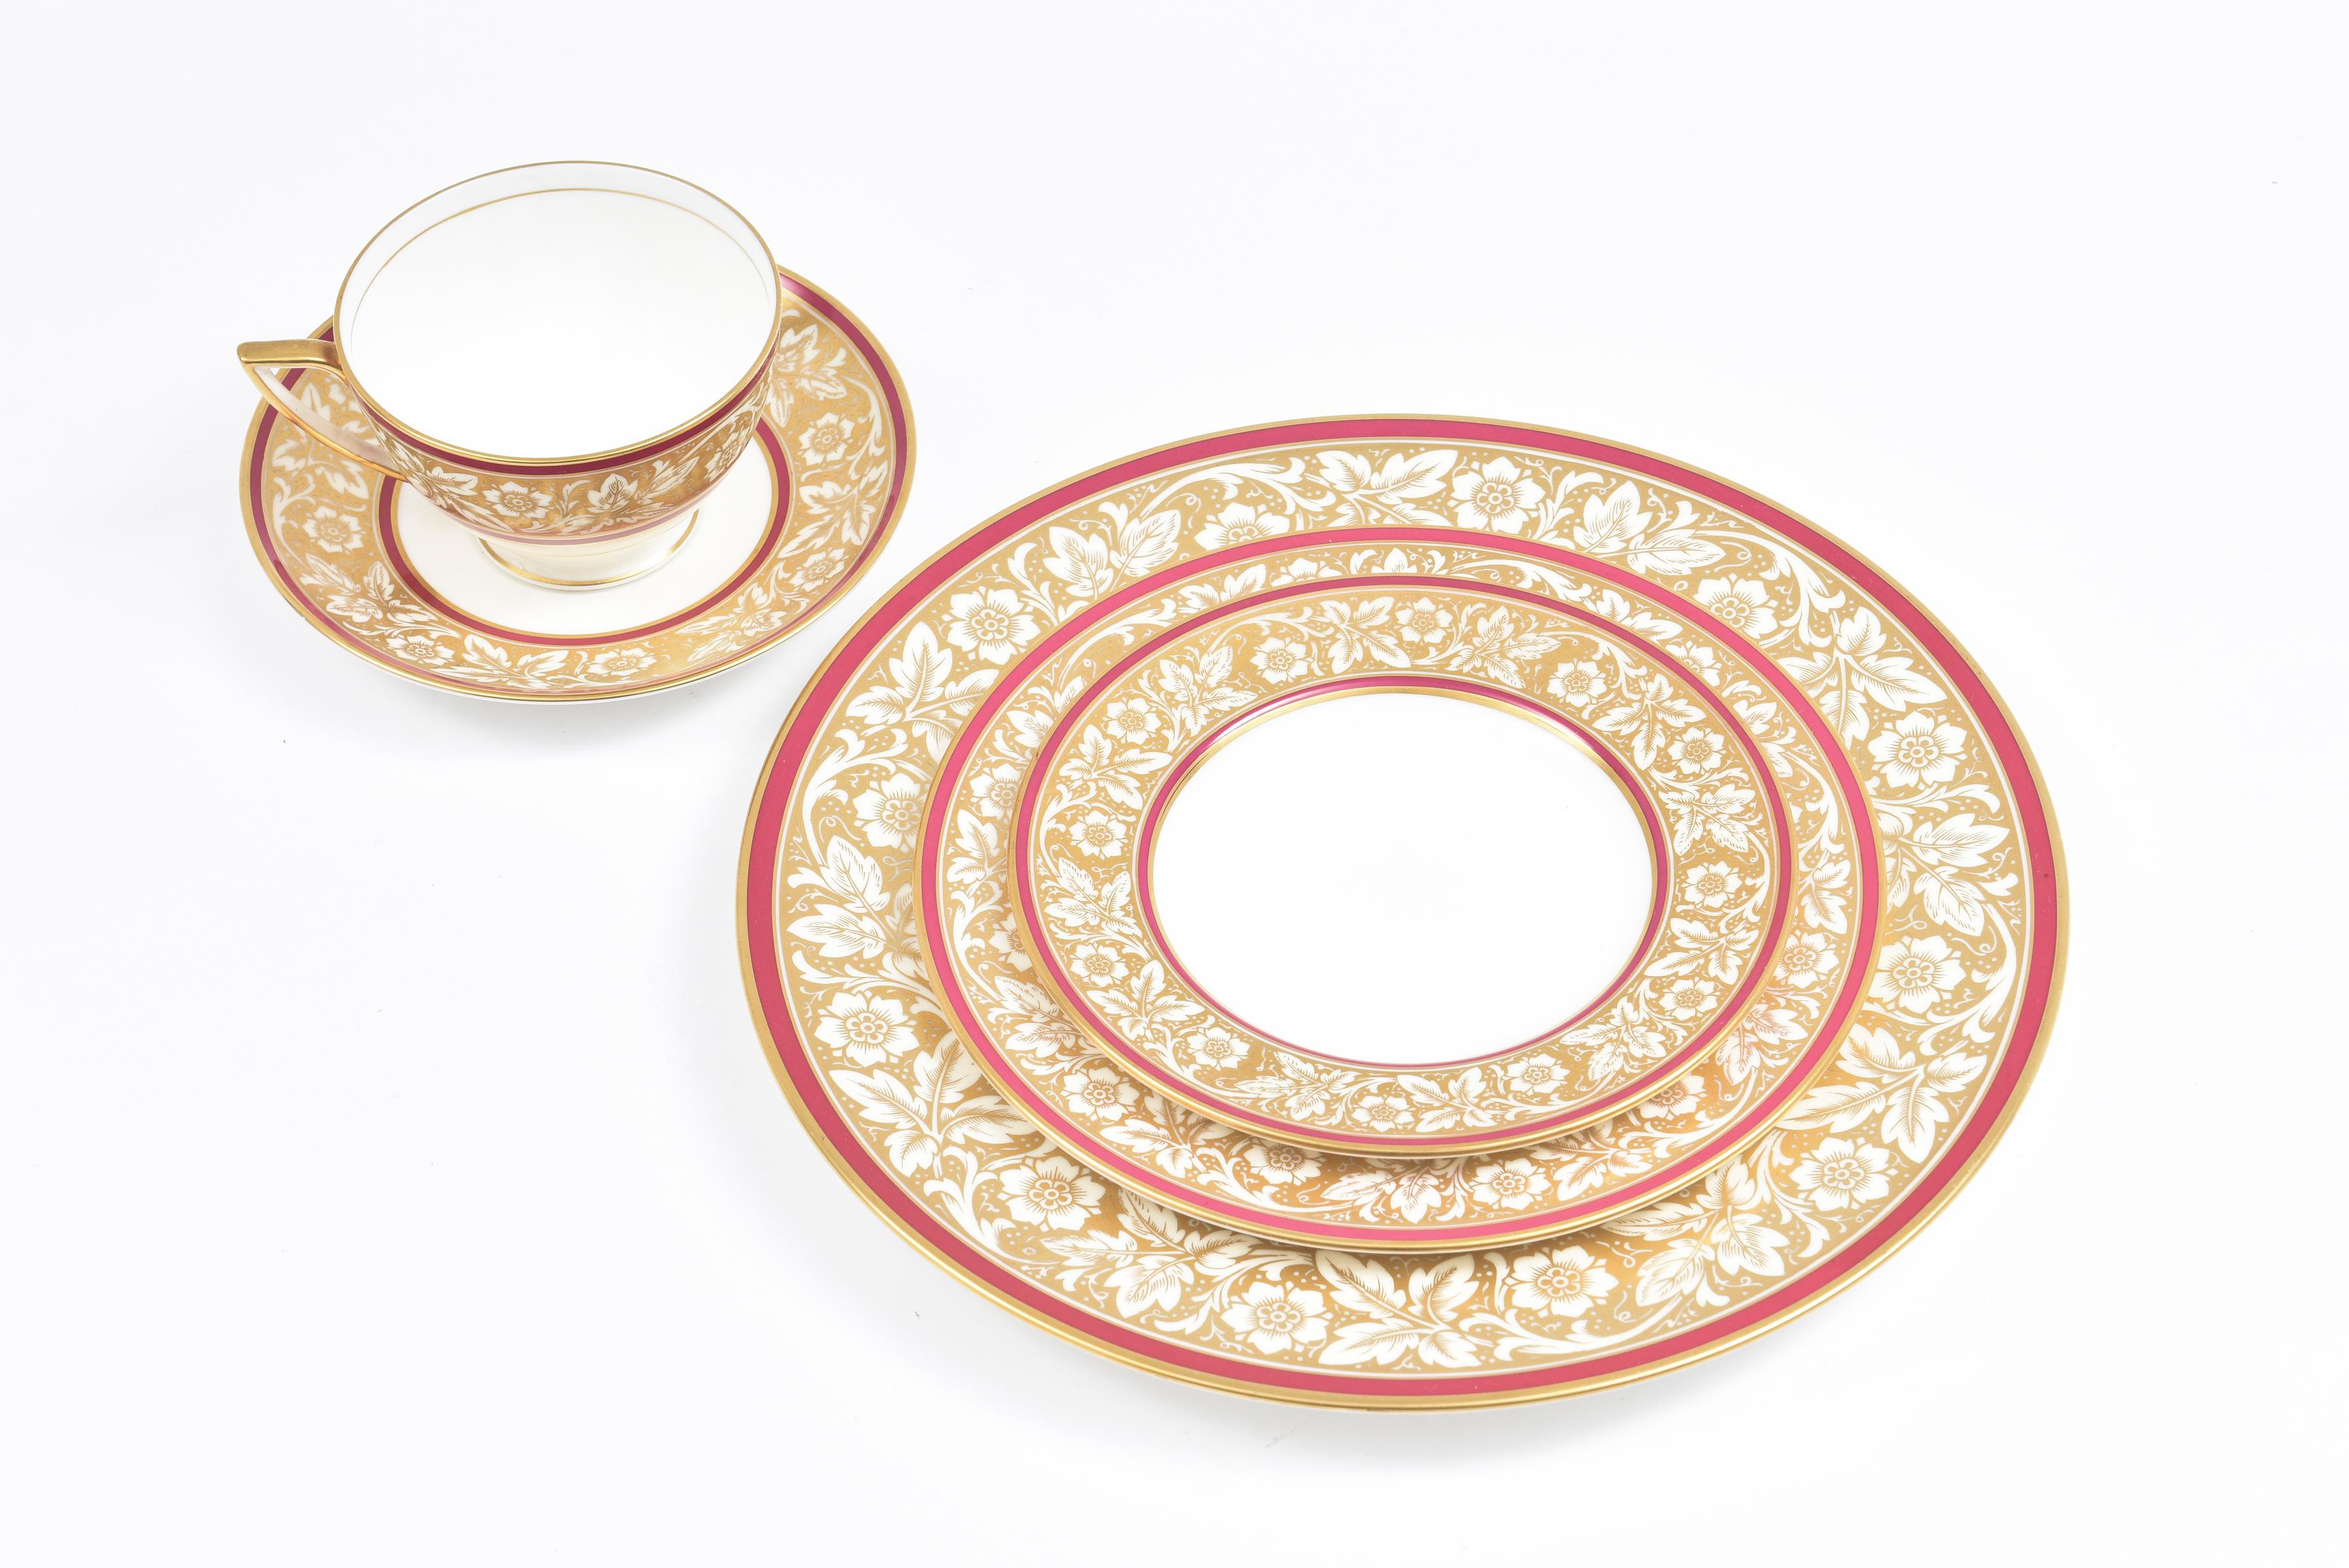 From one of England's premier porcelain factories Minton, this 5 piece place setting has service for 12. Classic and elegant with just a ruby red accent on the collar of the plate and a leaf motif. In very nice vintage condition and ready for your